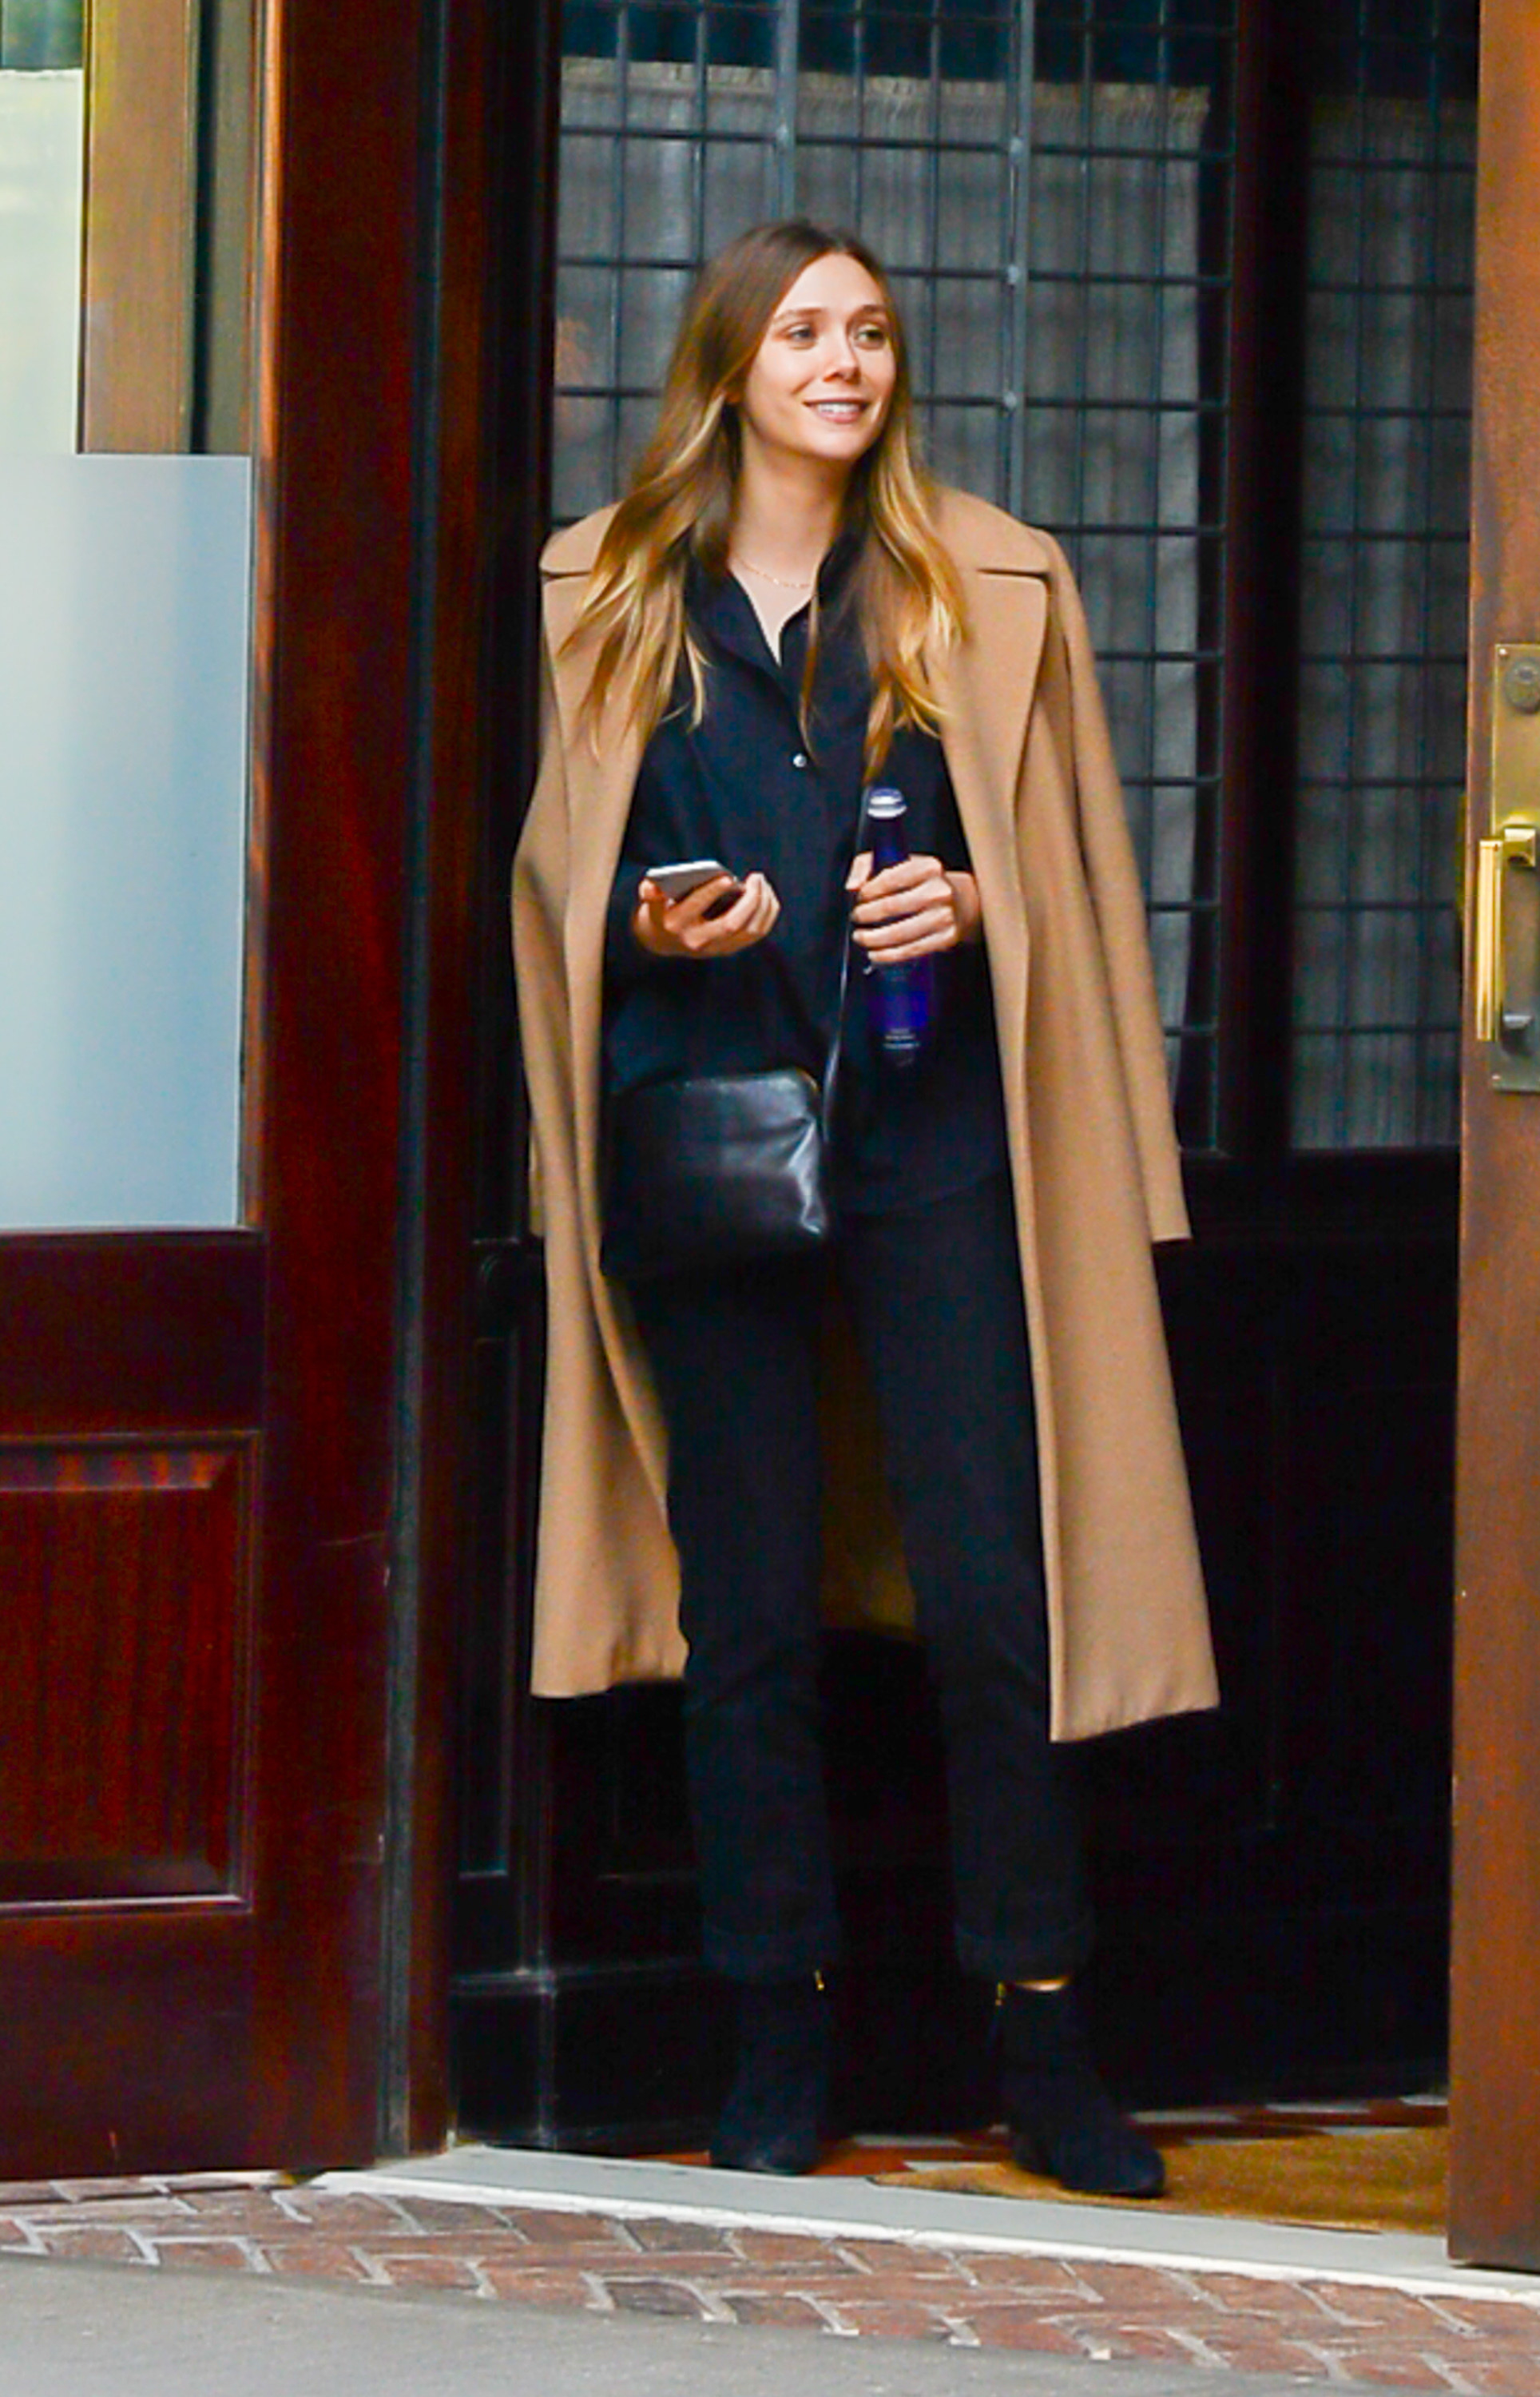 Photo of Elizabeth Olsen in jeans, a button down shirt and a tan coat